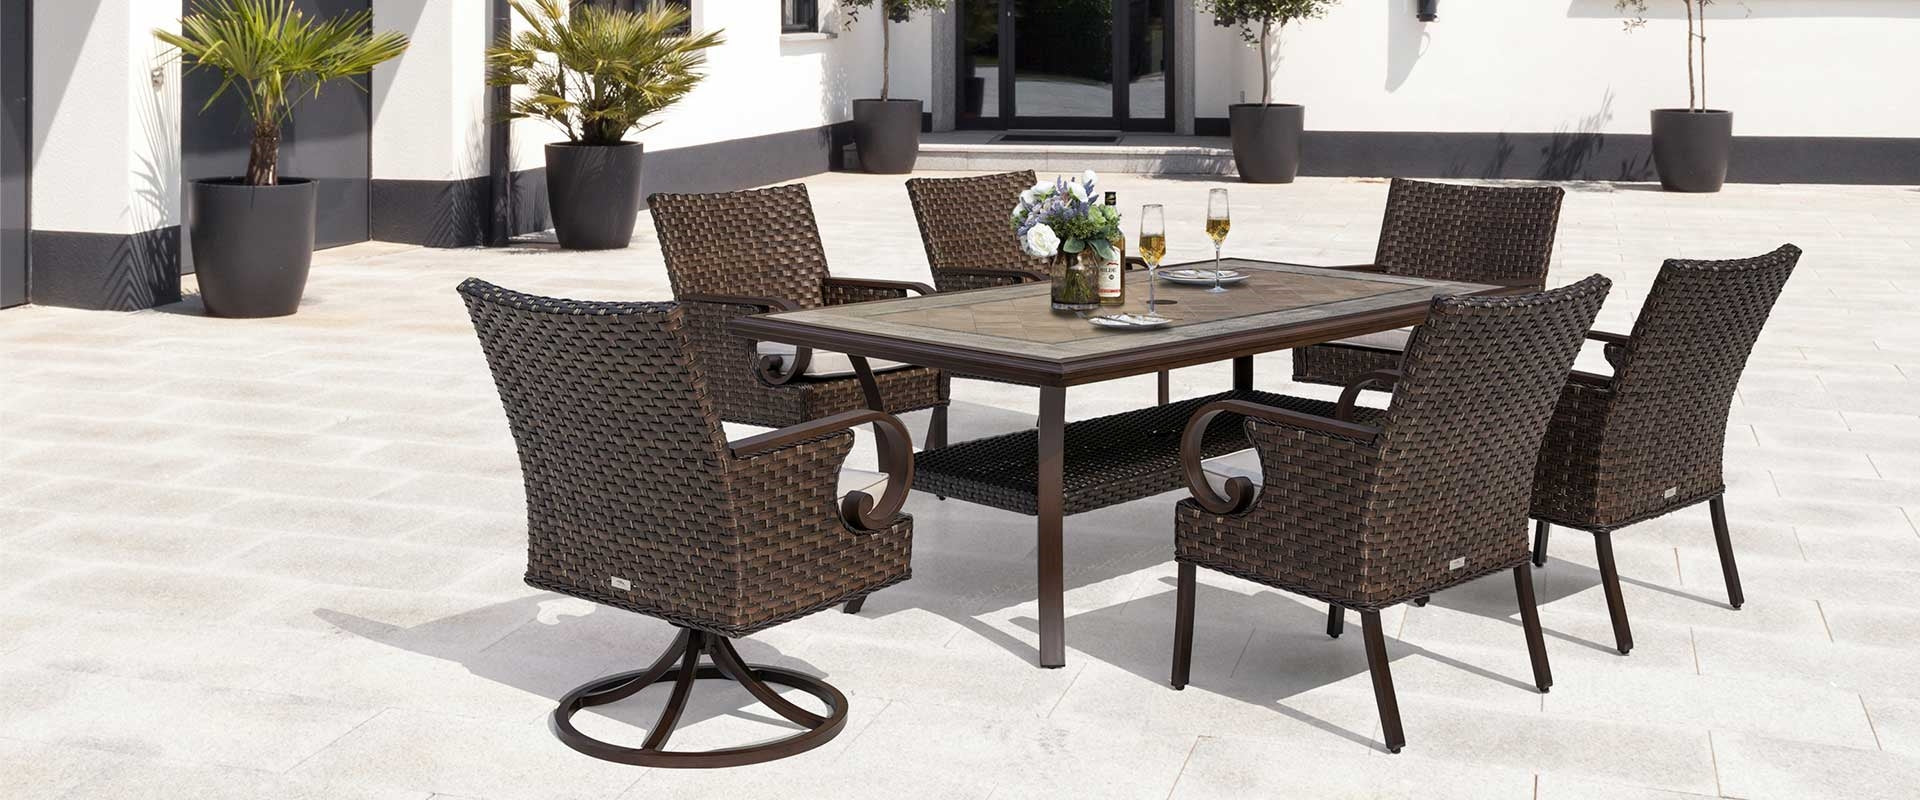 Patio Time Dinning Sets